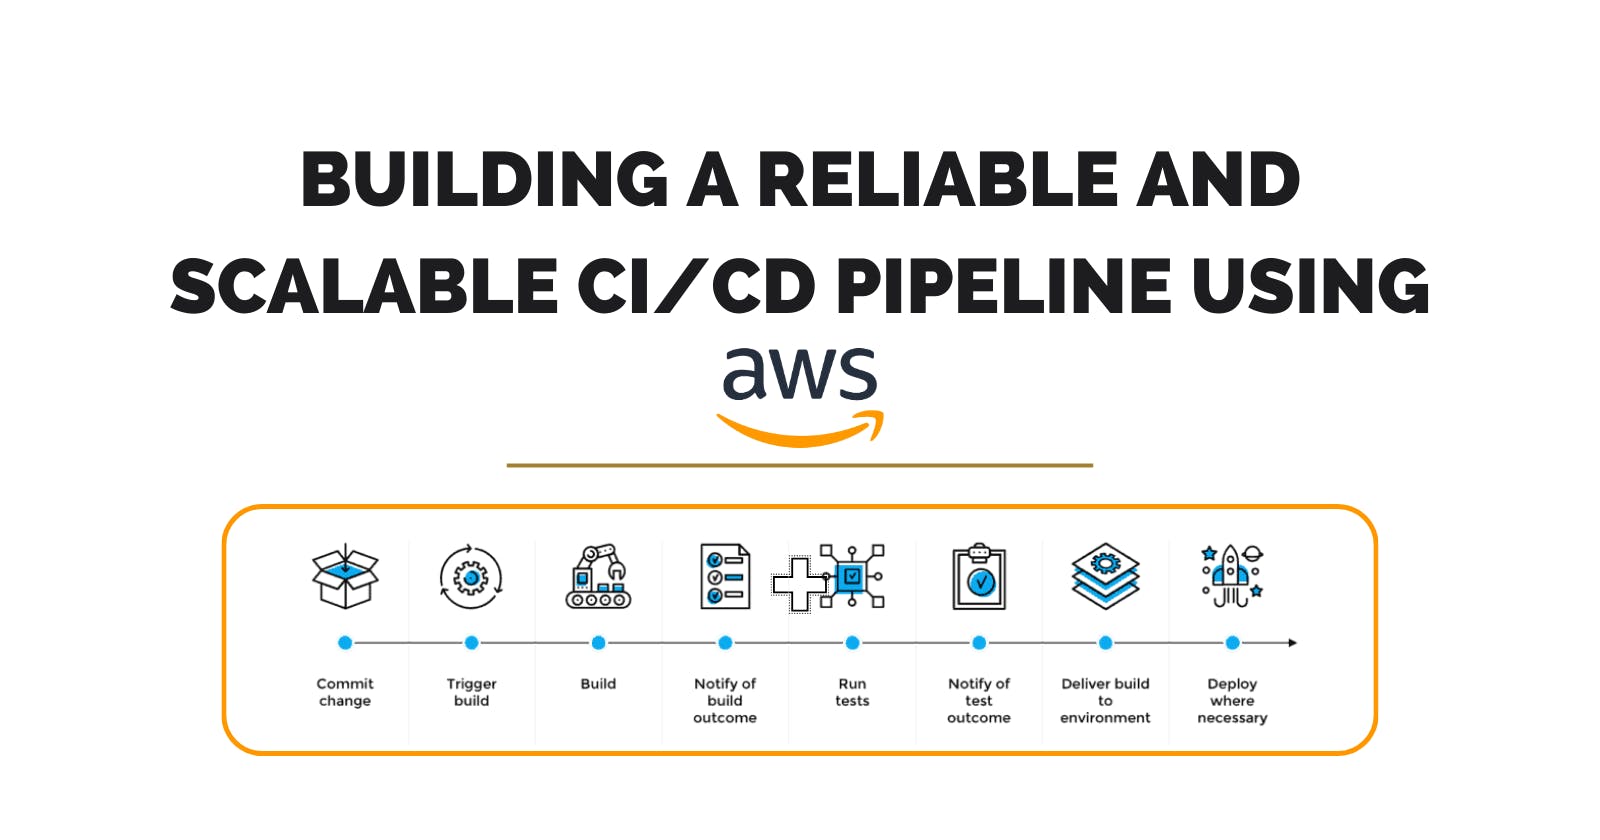 Building a Reliable and Scalable CI/CD Pipeline Using AWS